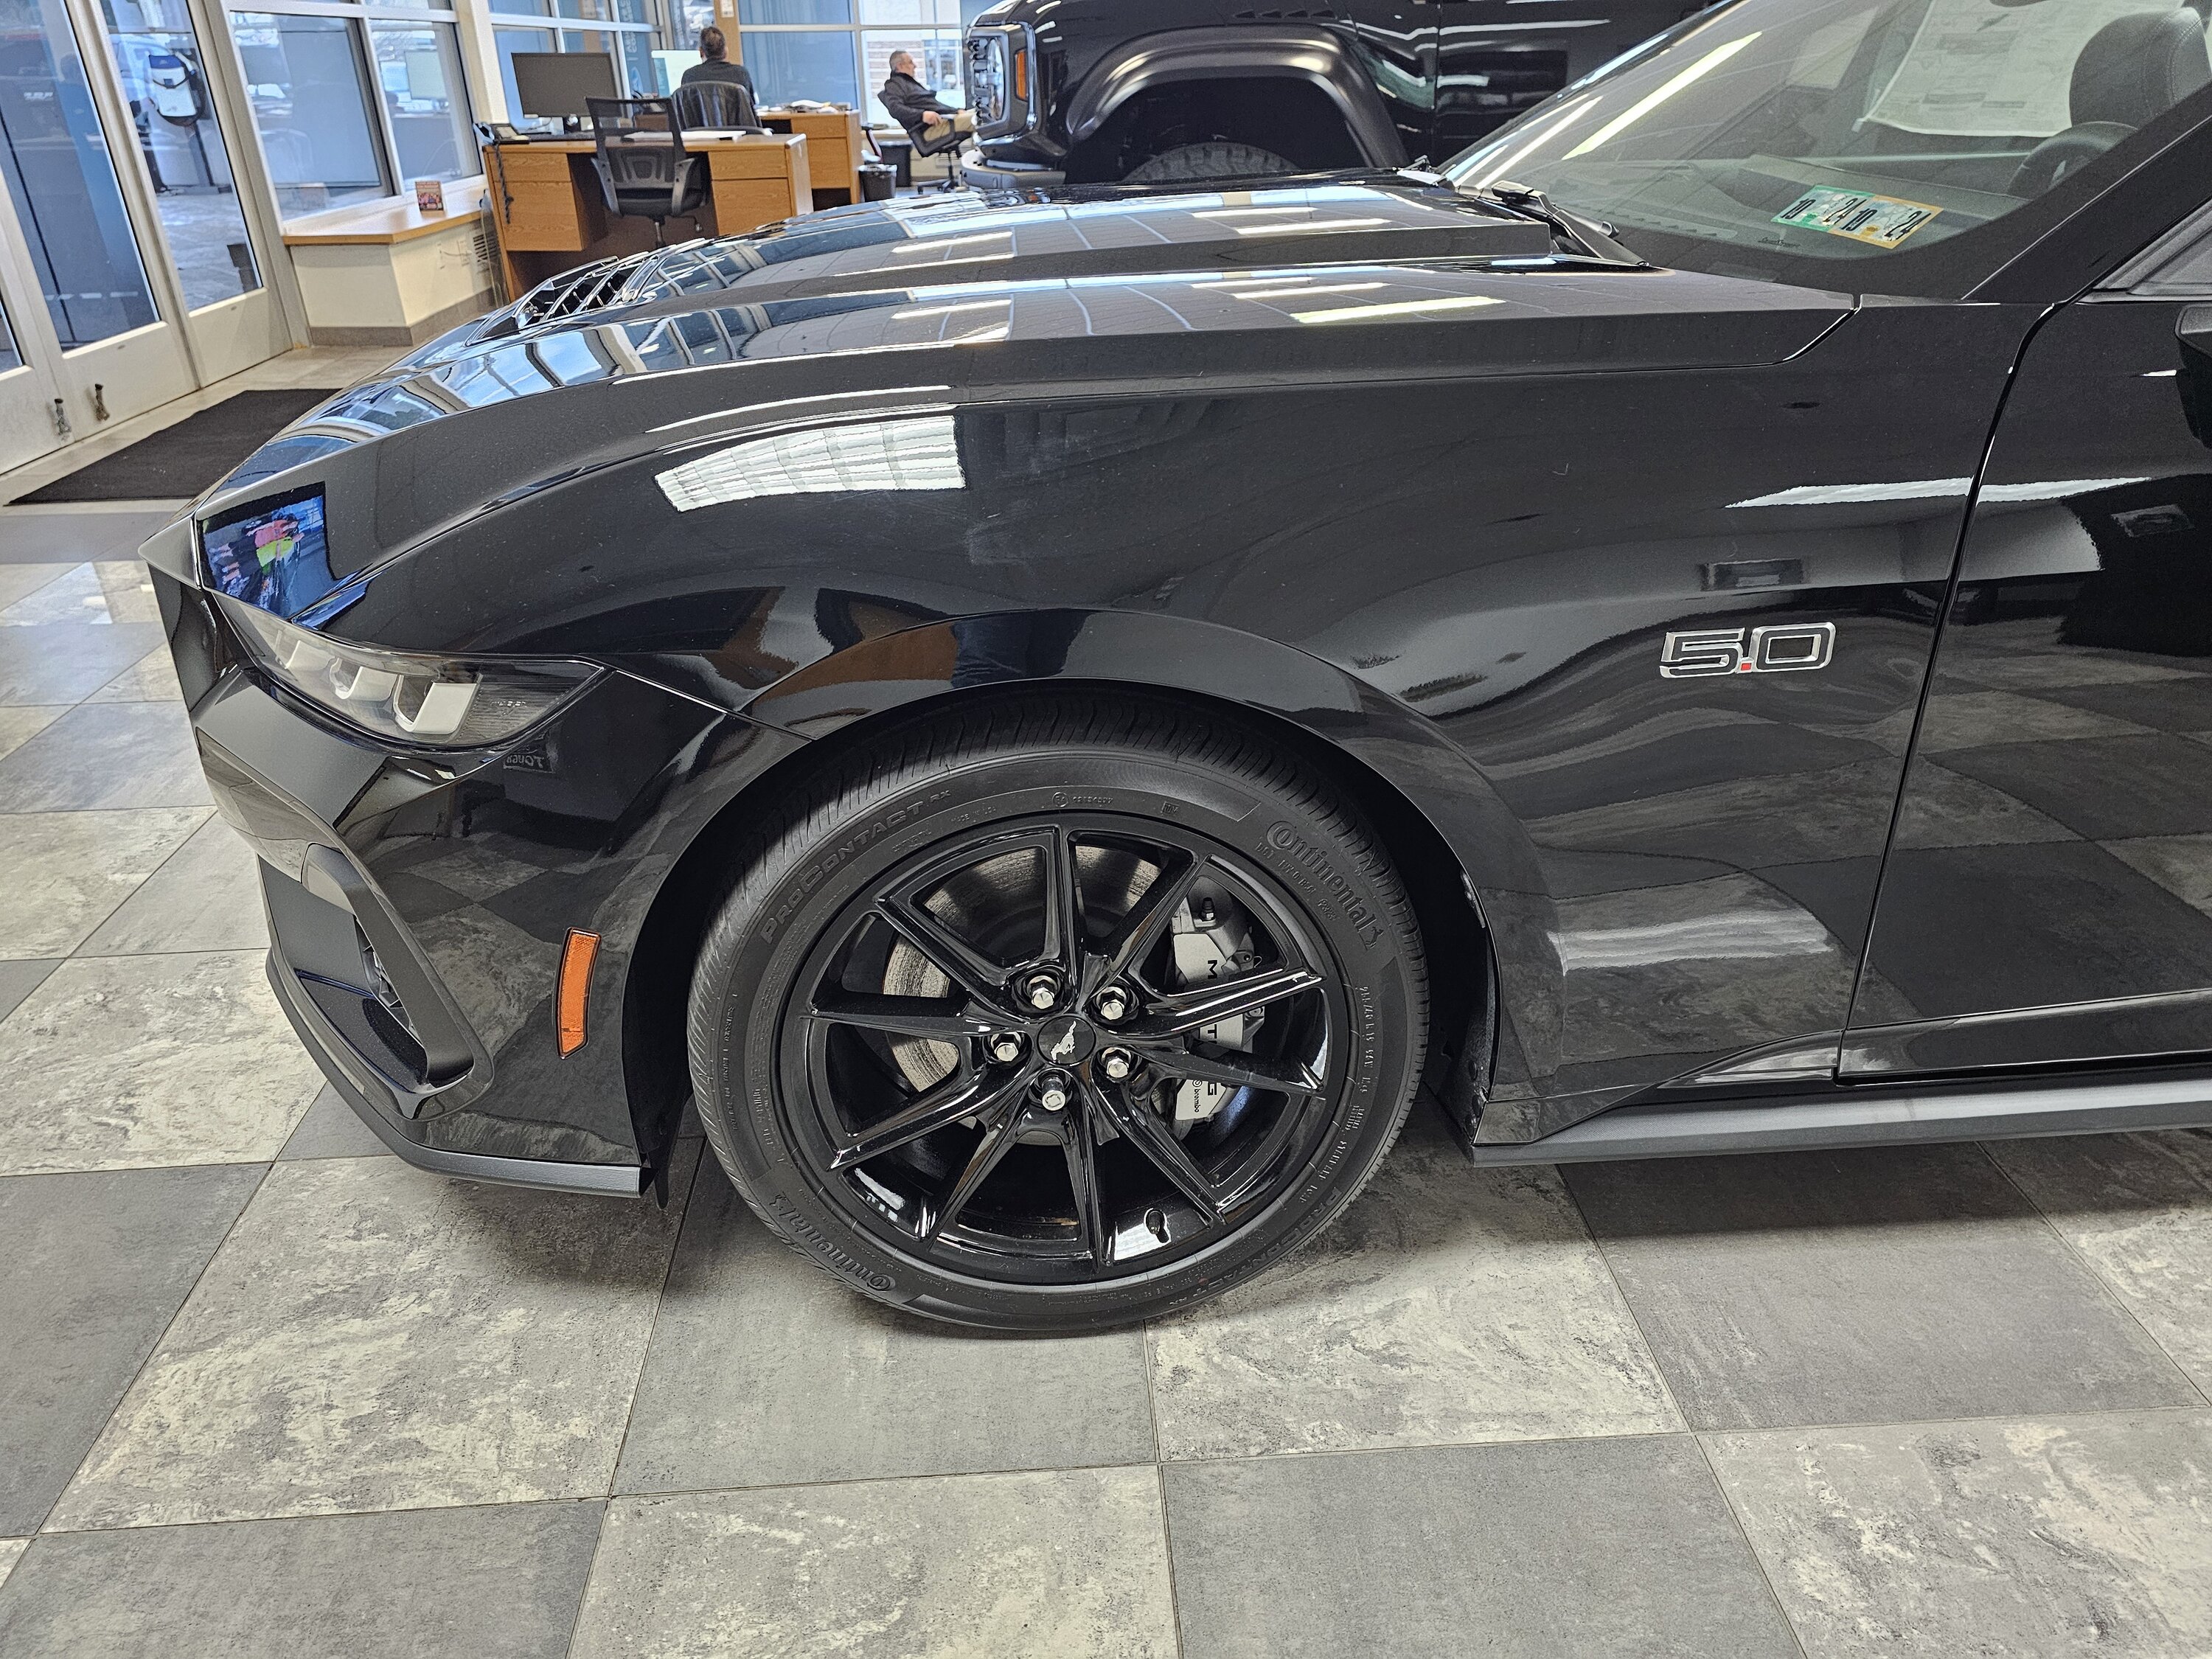 S650 Mustang Check out this covertible's wheels 1000010969